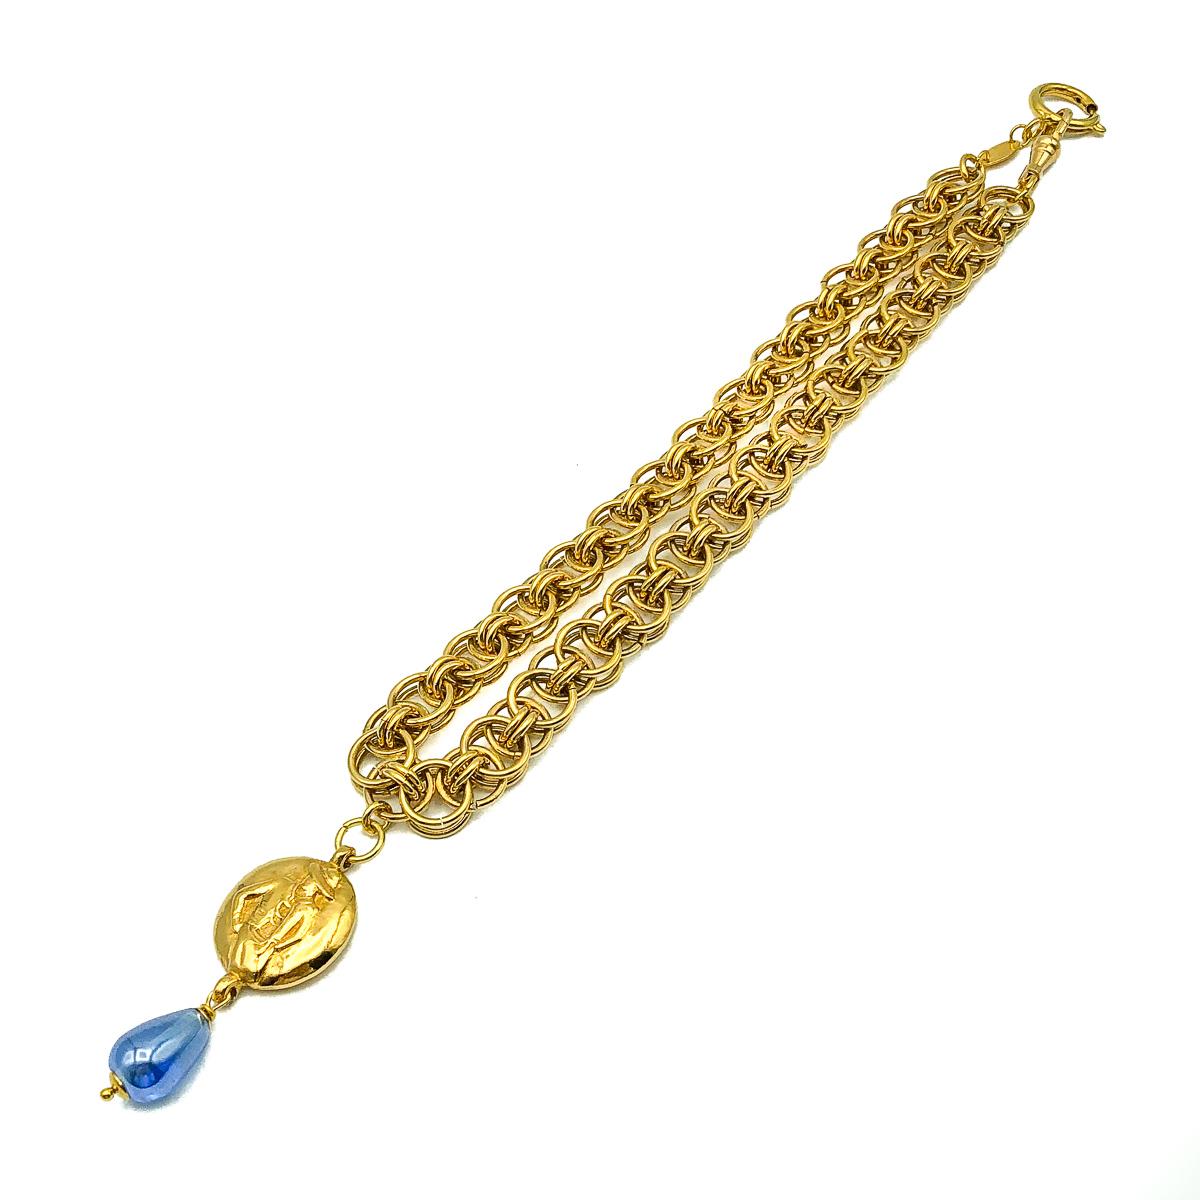 A beautiful Vintage Chanel Coco Collar. Crafted in gold plated metal and glass. Featuring a double stack ring chain with a pendant that portrays Coco Chanel on one side and the CHANEL name on the reverse. Finished with a blue glass teardrop. In very